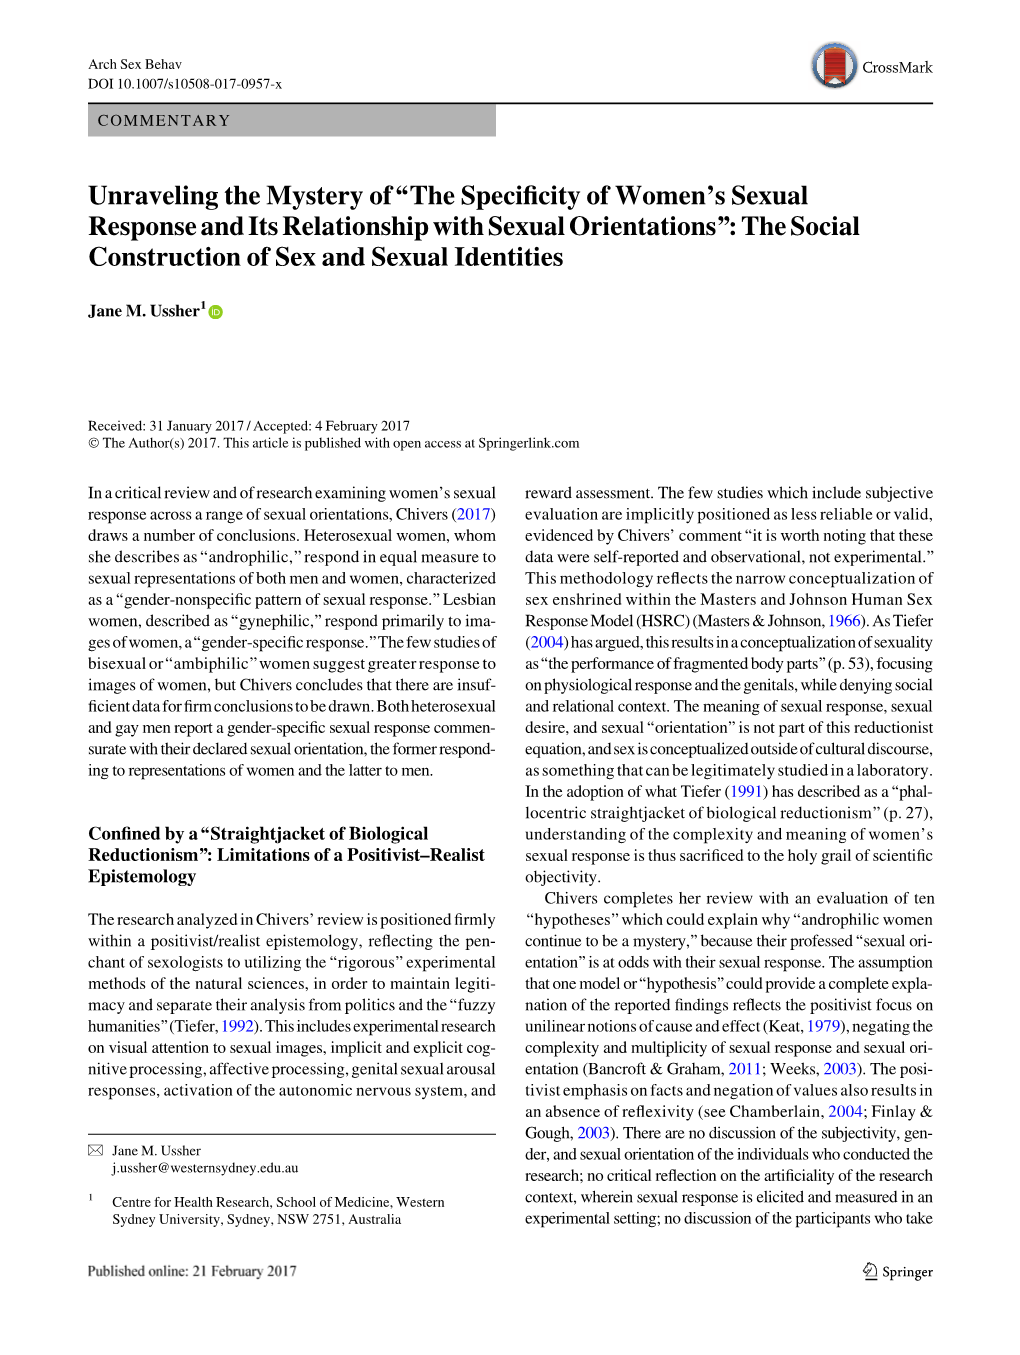 The Specificity of Women's Sexual Response and Its Relationship With